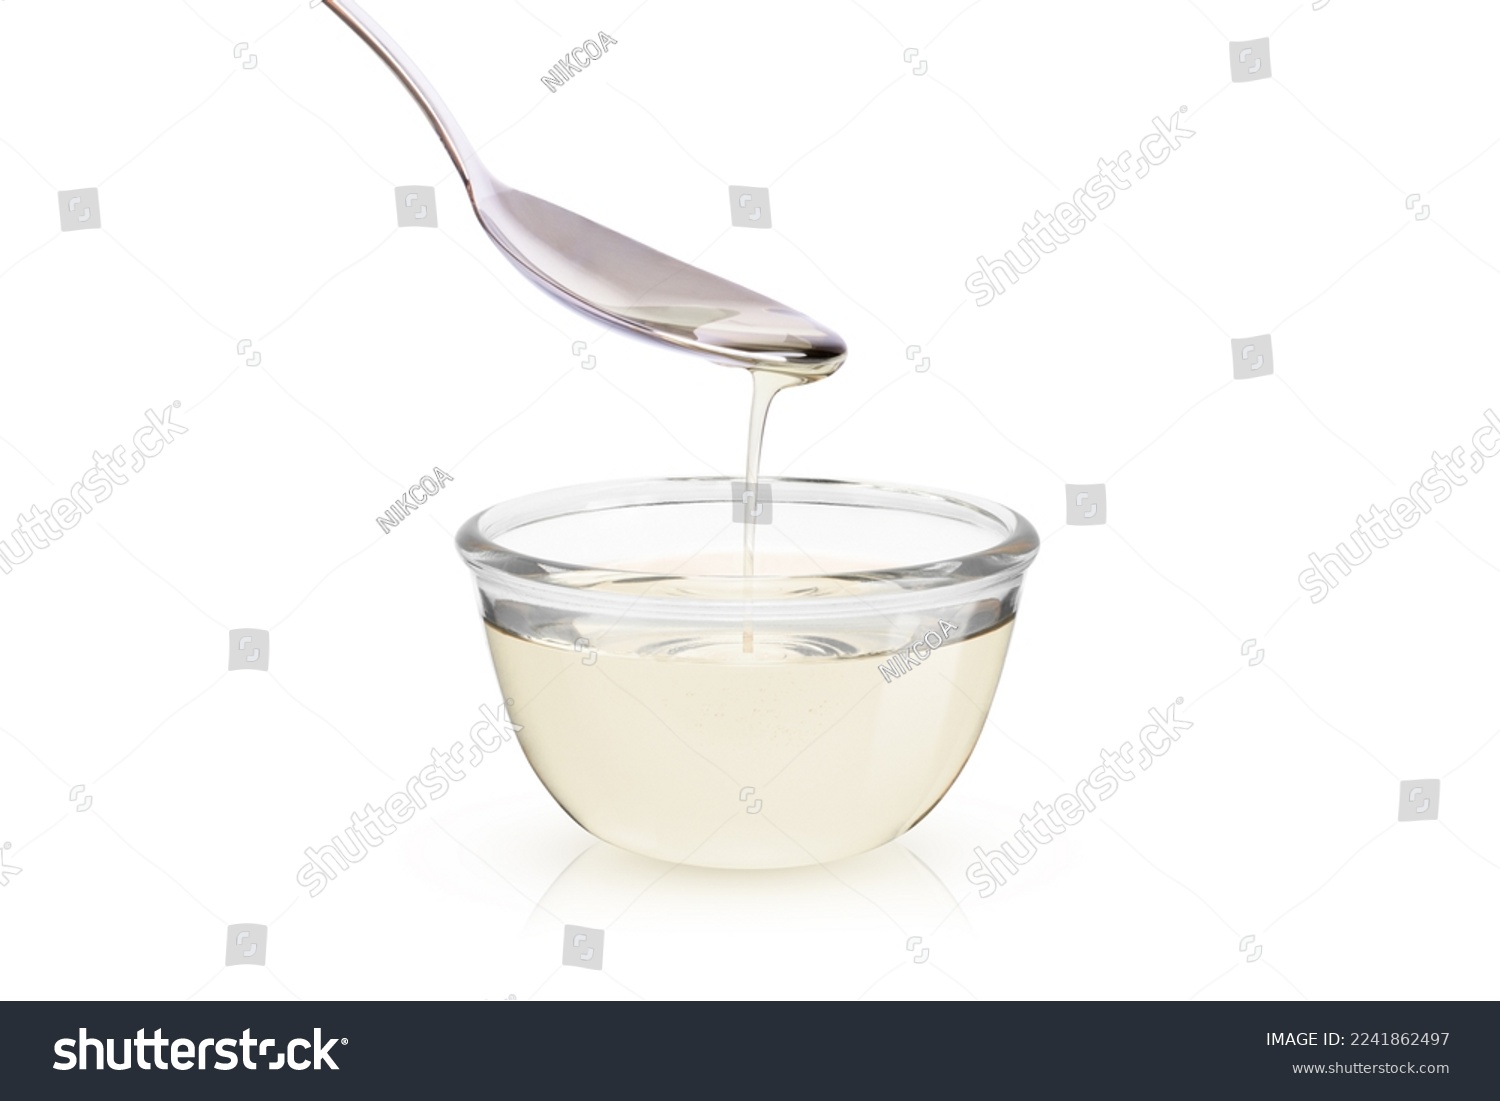 Sugar syrup in glass bowl isolated on white background  #2241862497